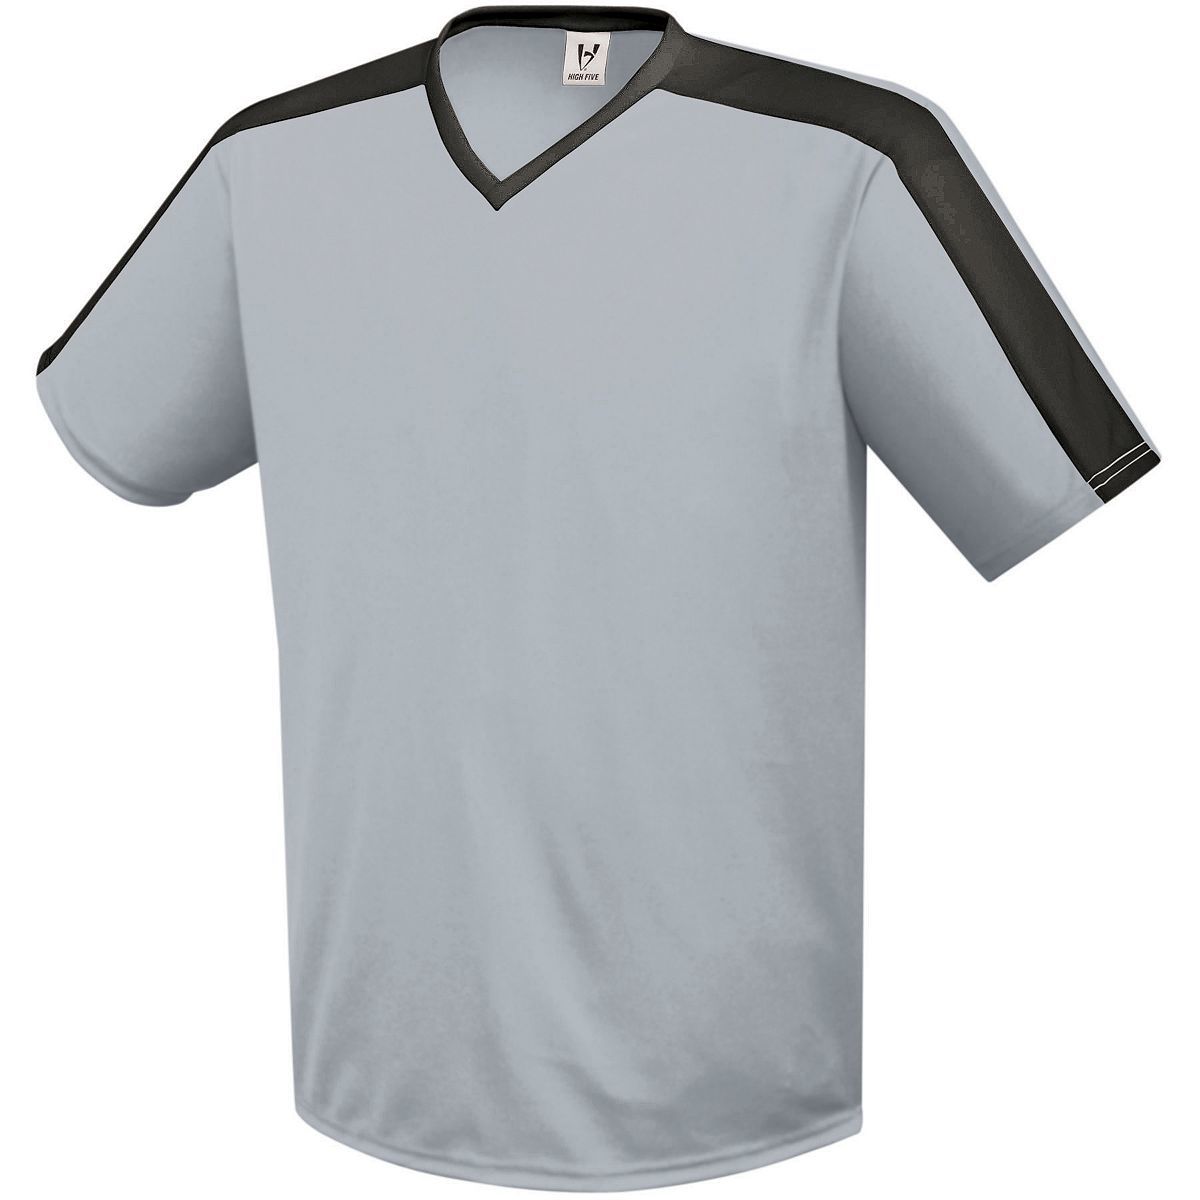 High 5 Genesis Soccer Jersey in Silver Grey/Black  -Part of the Adult, Adult-Jersey, High5-Products, Soccer, Shirts, All-Sports-1 product lines at KanaleyCreations.com